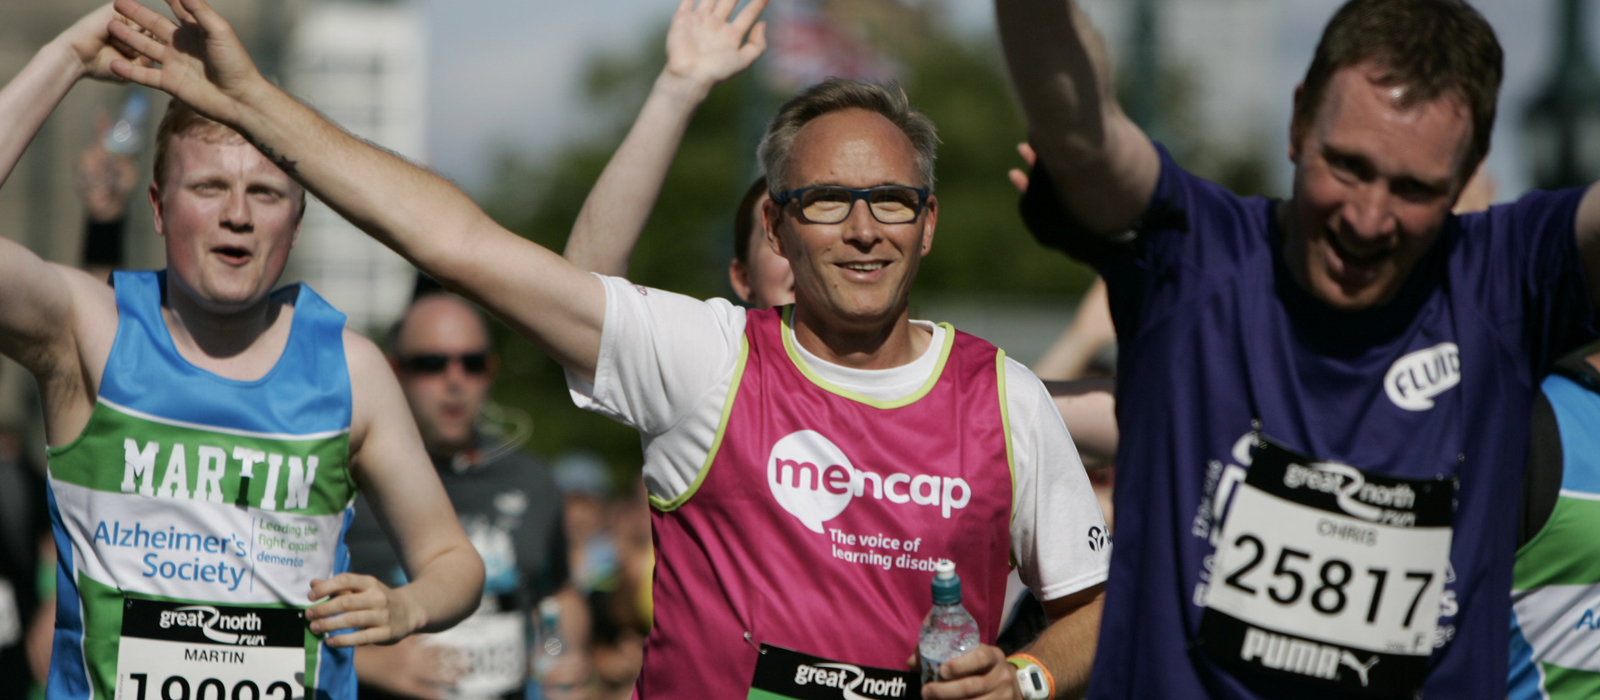 Group of runners taking part in outdoor running event on sunny day. A man in the middle of the photo has grey hair and glasses and is wearing a Mencap running vest whilst waving his arm in the air.